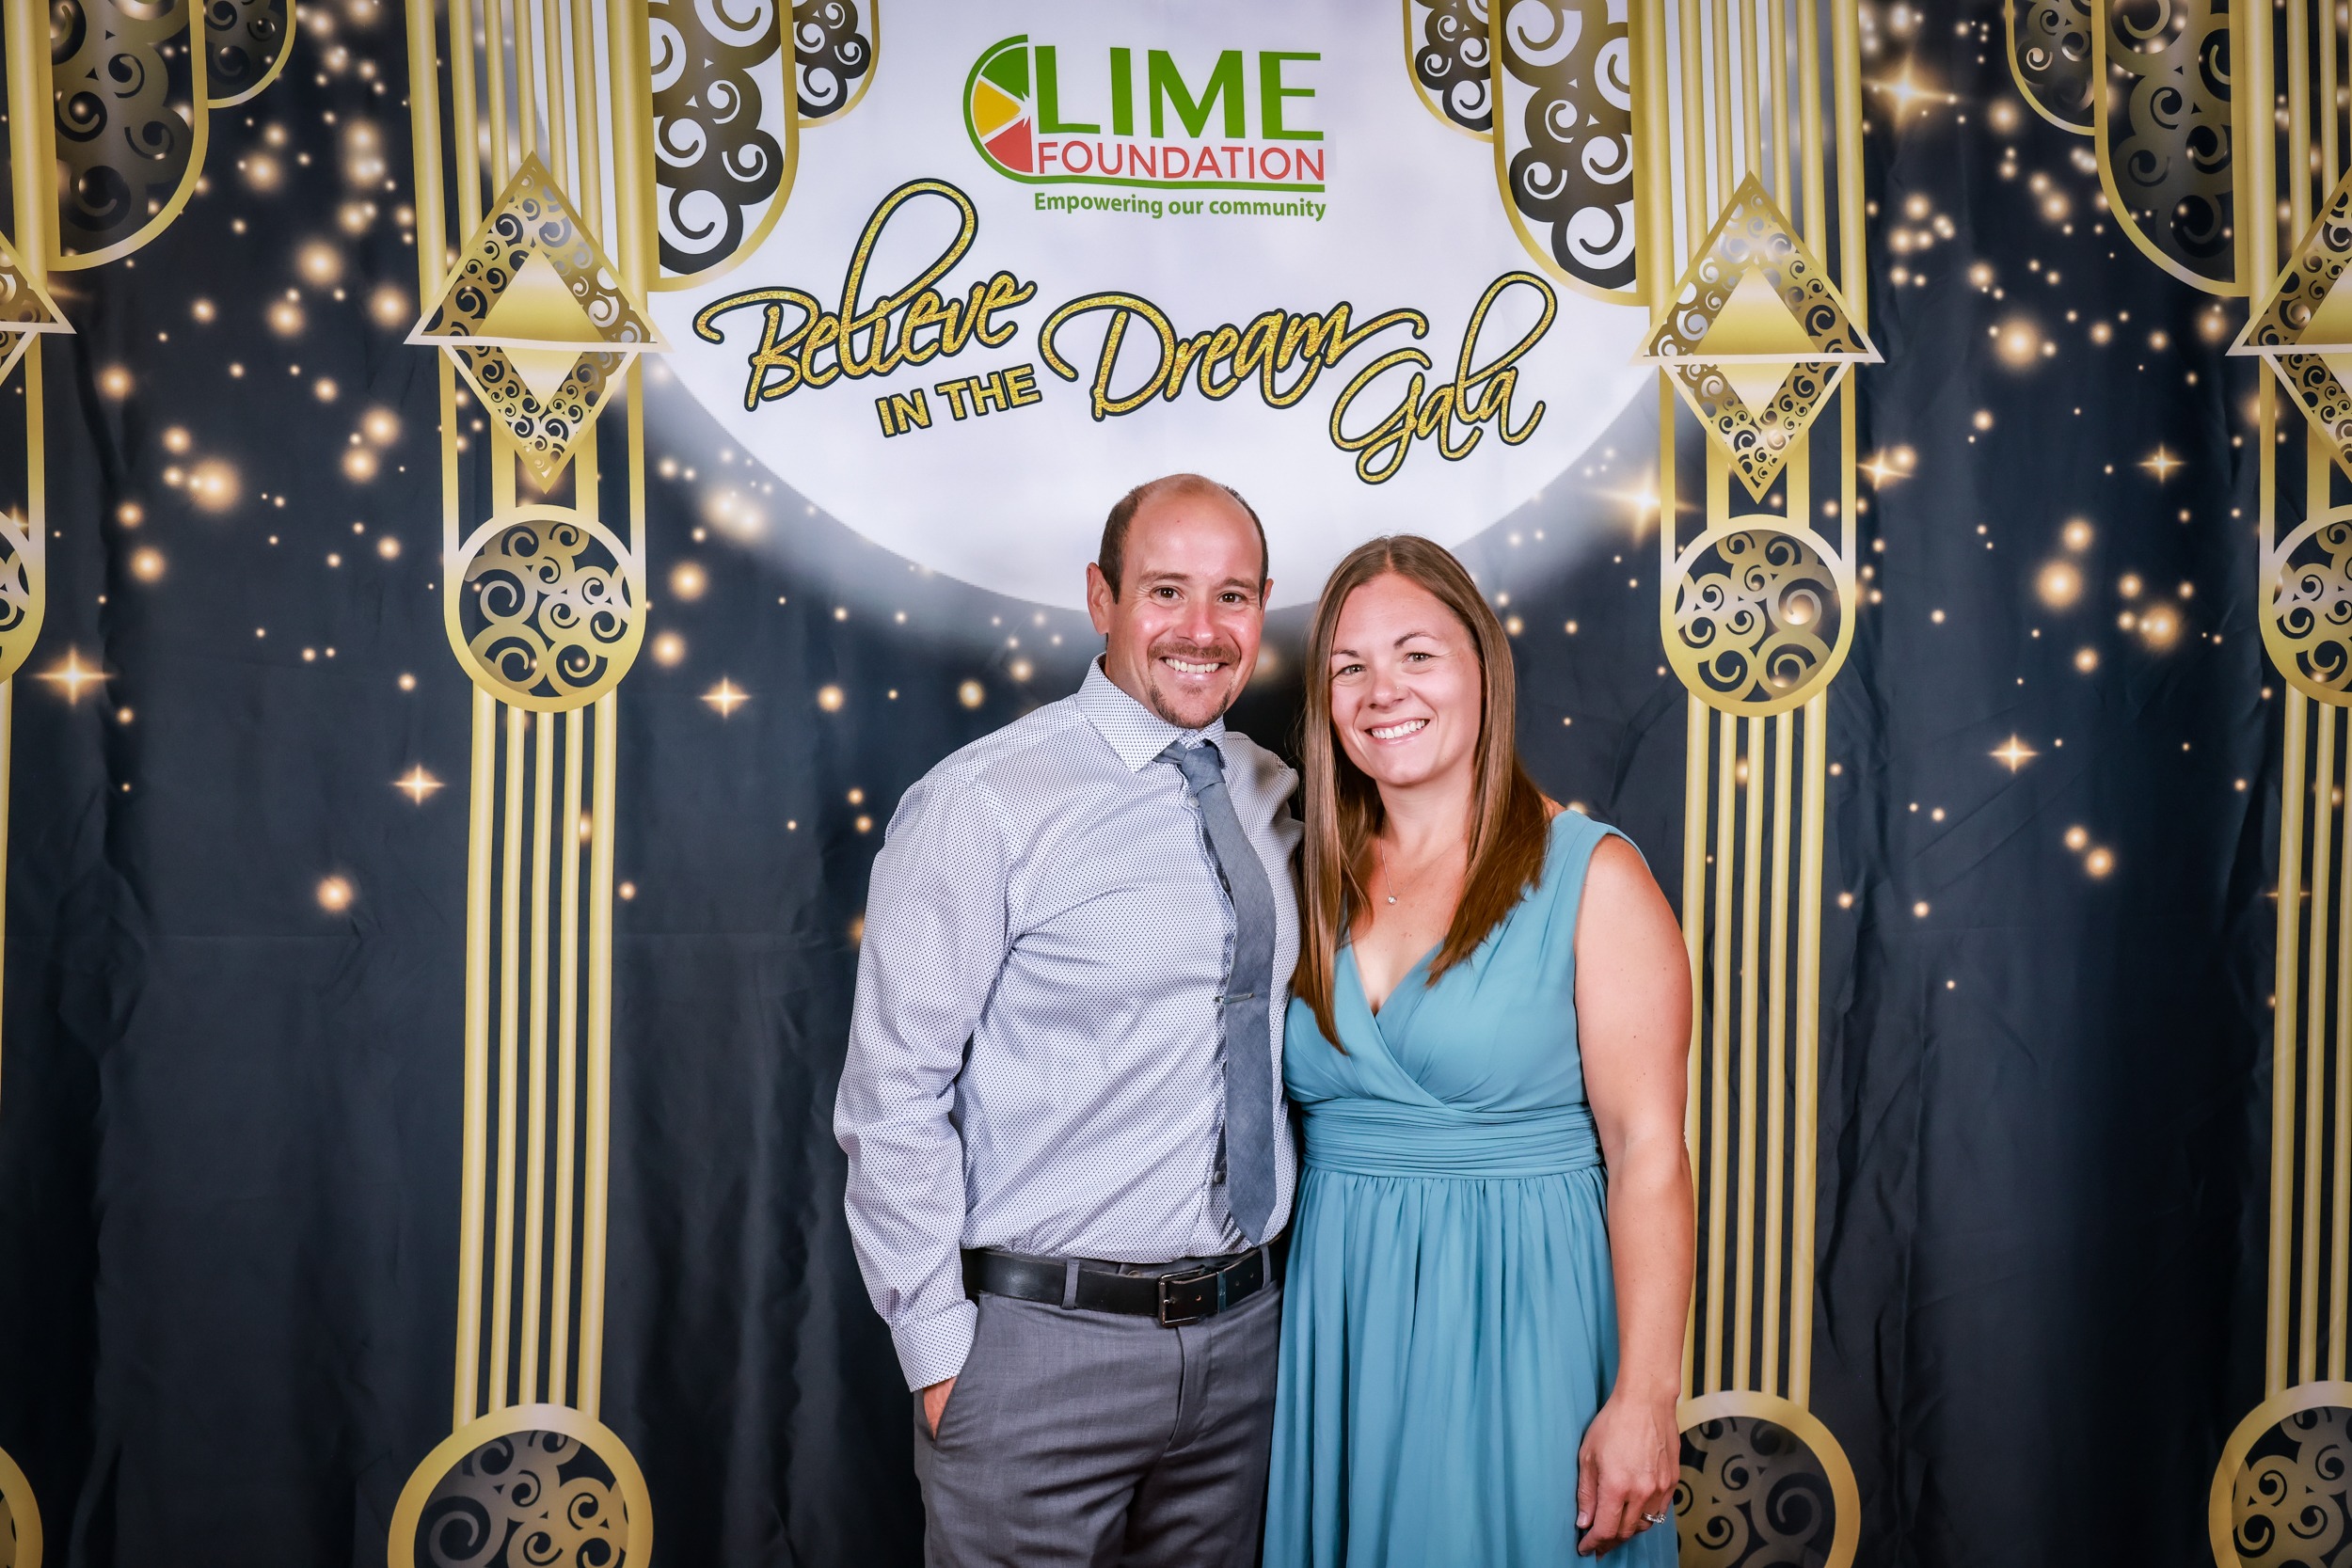 A man and woman are posing in front of a photo booth at The LIME Foundation of Santa Rosa.